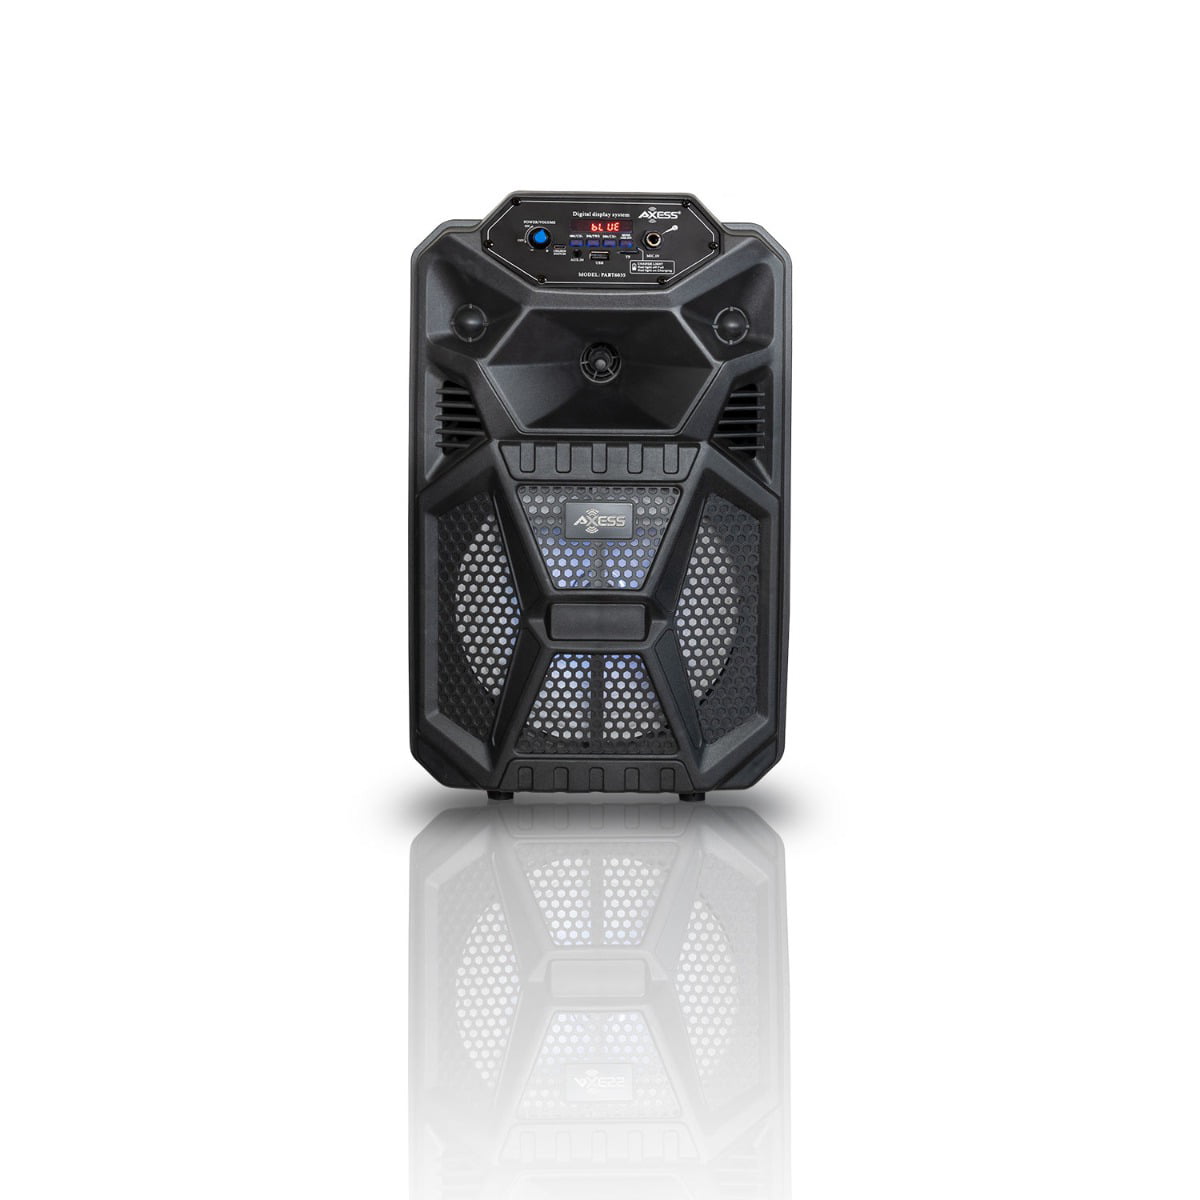 Battery, & FM, USB Indoor Axess Speaker Lights, Remote AUX Portable Mic 8\